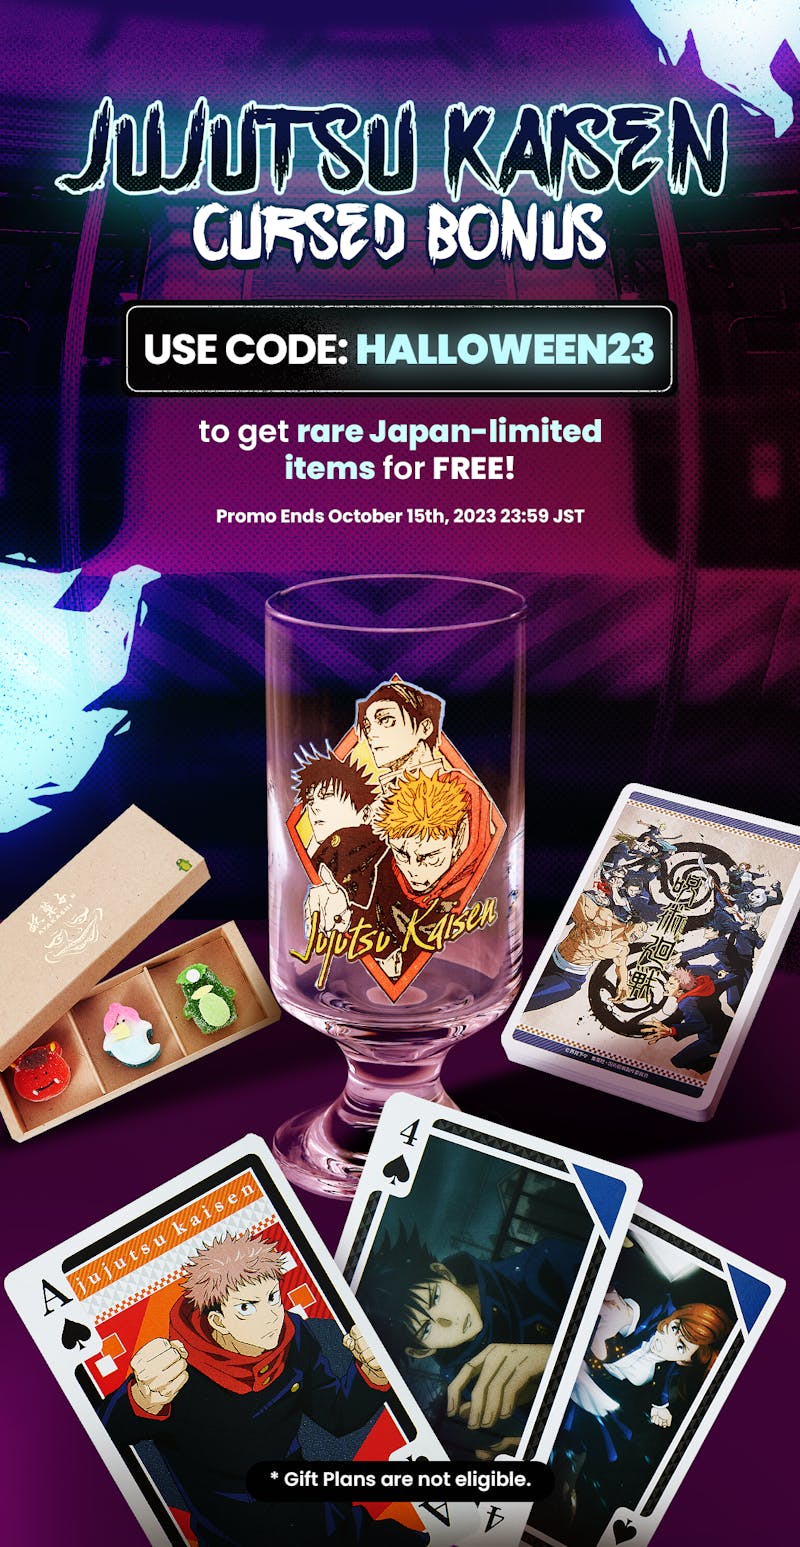 TokyoTreat's  October Jujutsu Kaisen campaign promotion with featured items.